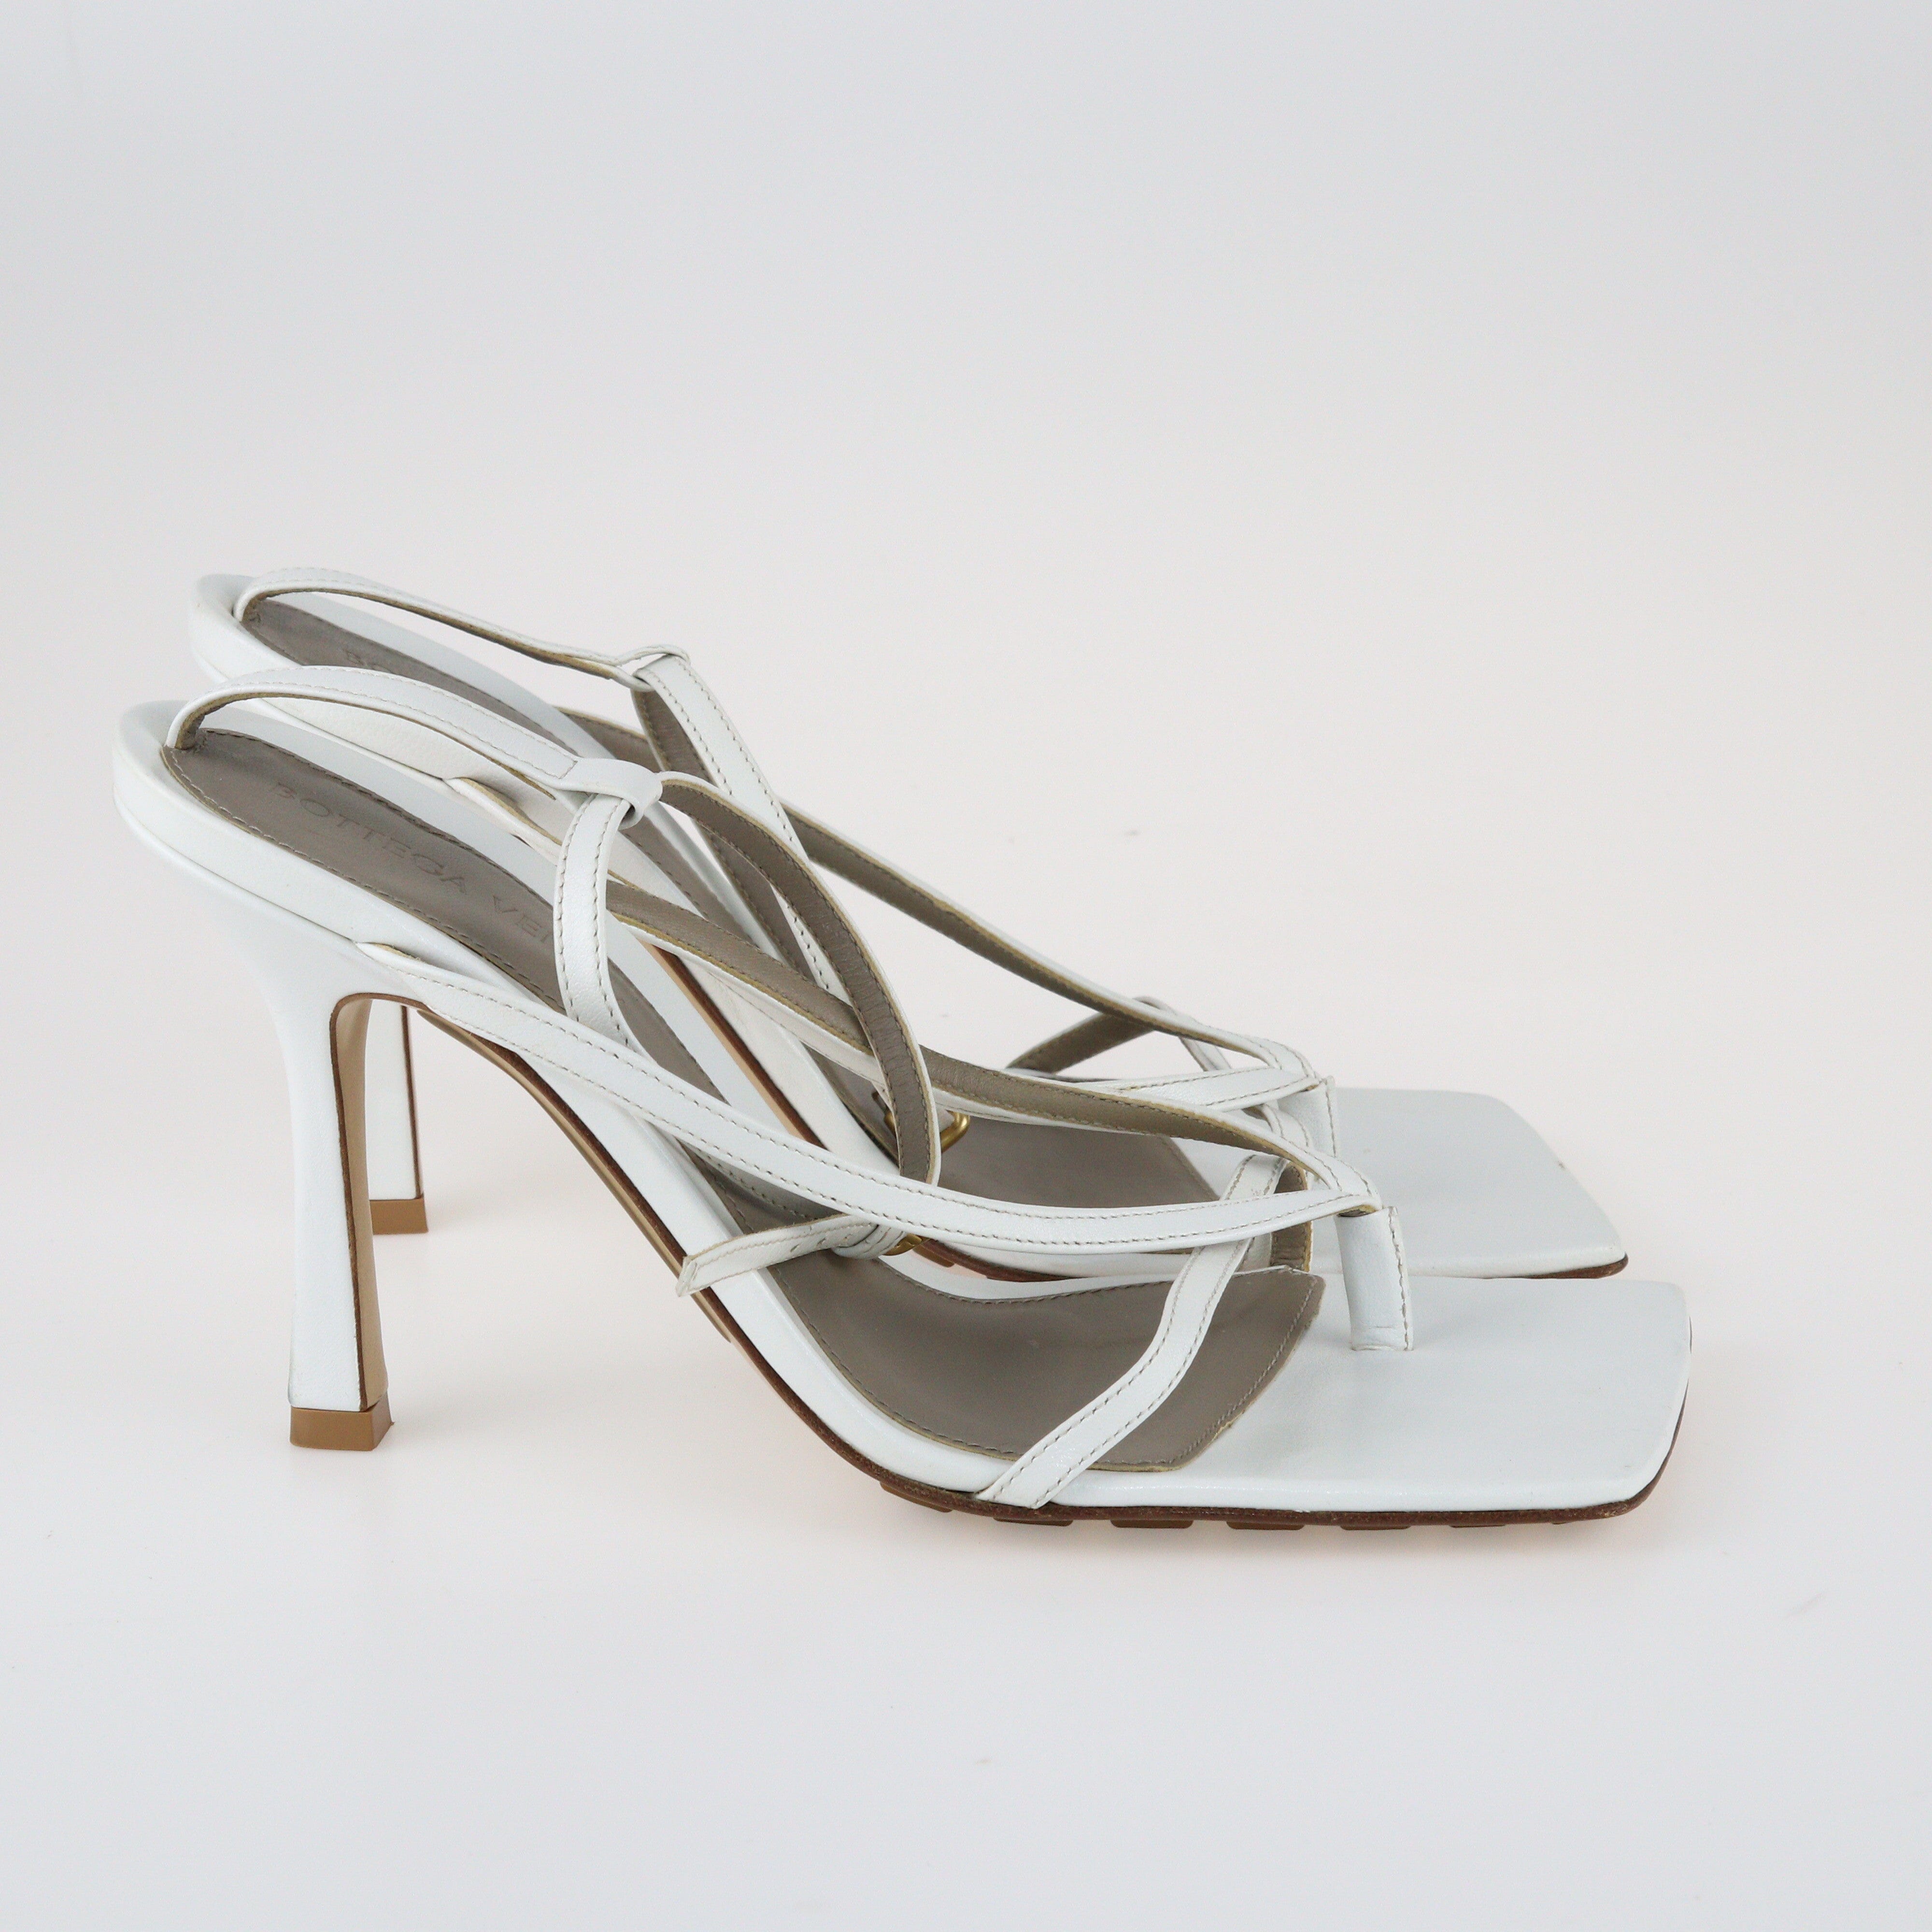 White Stretch Ankle Strap Sandals Shoes Garderobe Pre-loved Luxury Fashion 